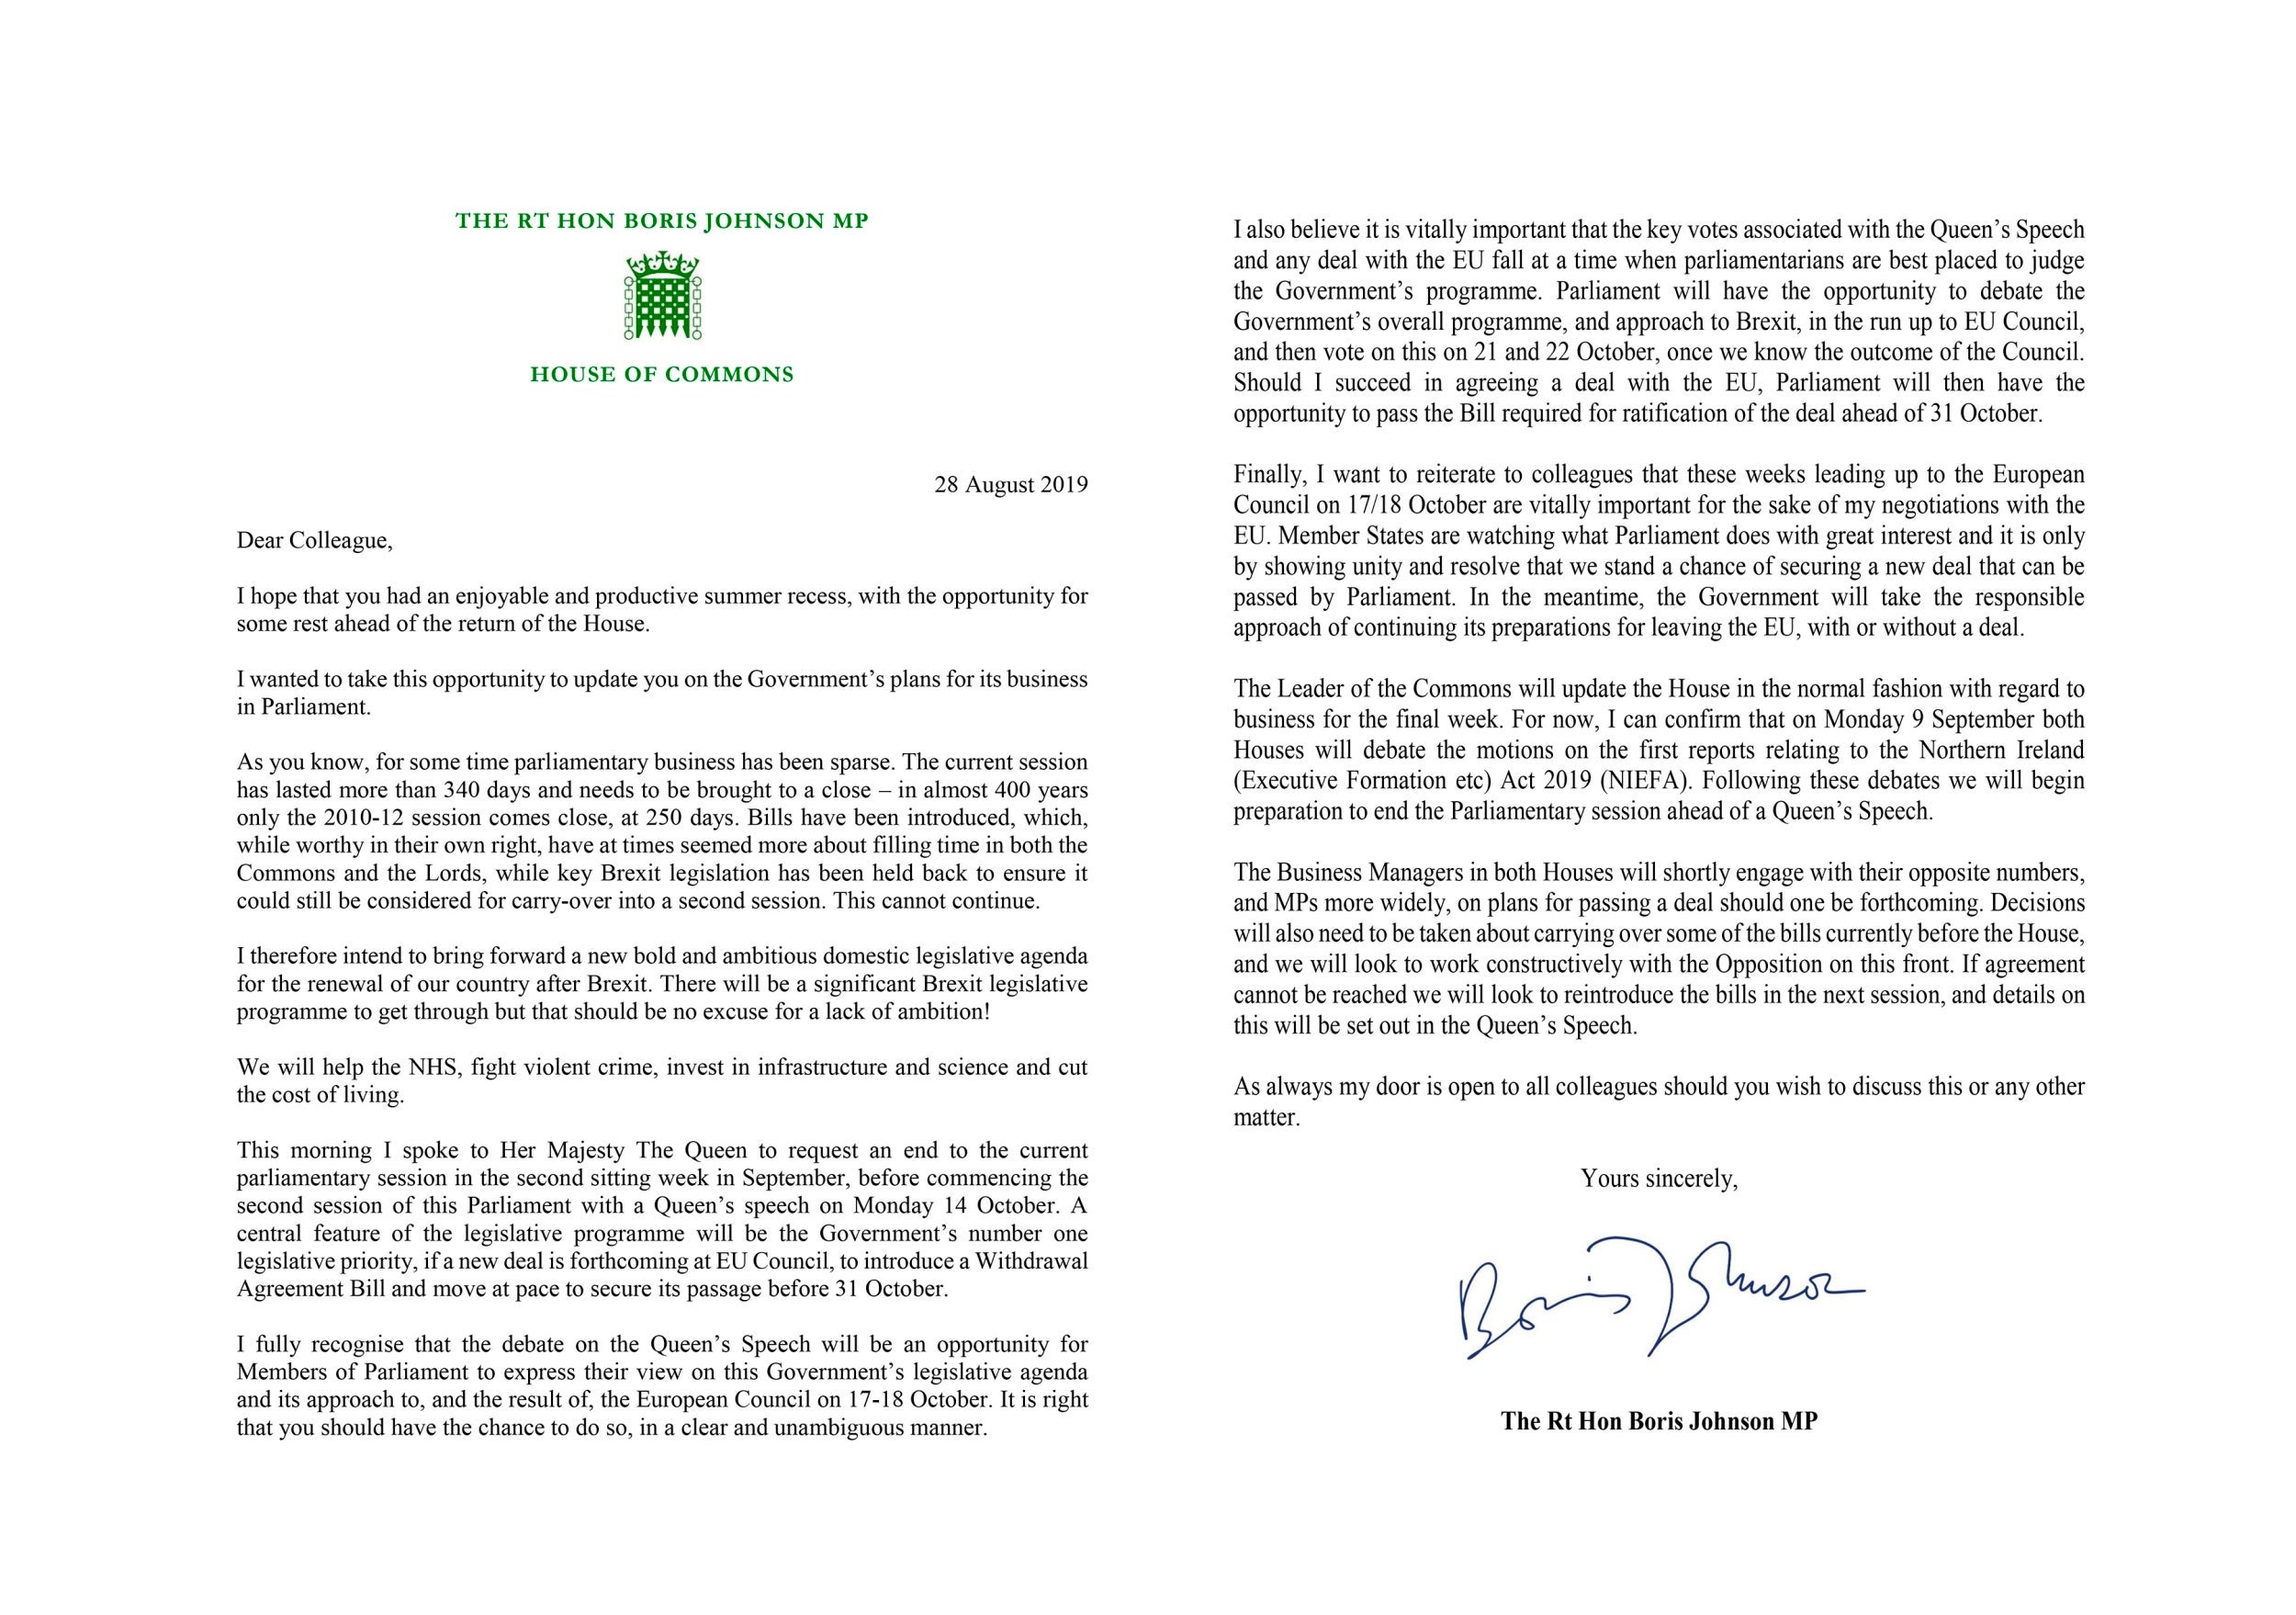 Boris Johnson’s letter to MPs announcing his plan to prorogue parliament (Downing Street/AP)